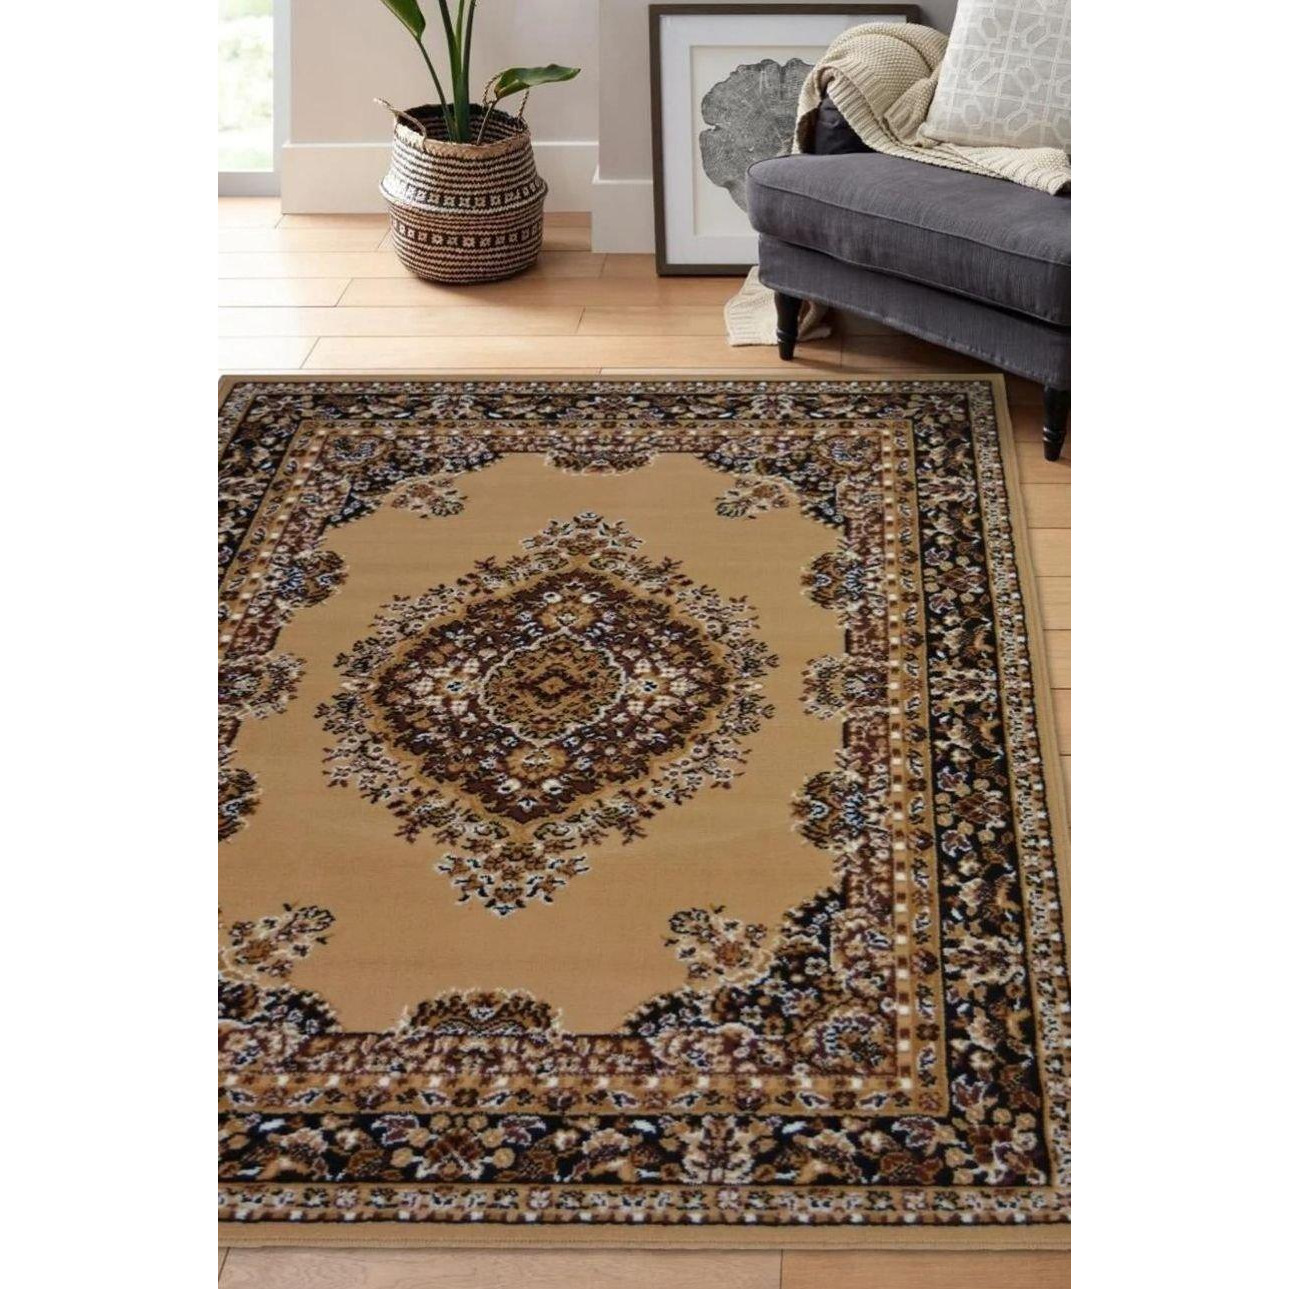 Maestro Collection Traditional Design Rug in Brown - 4470 B55 - image 1